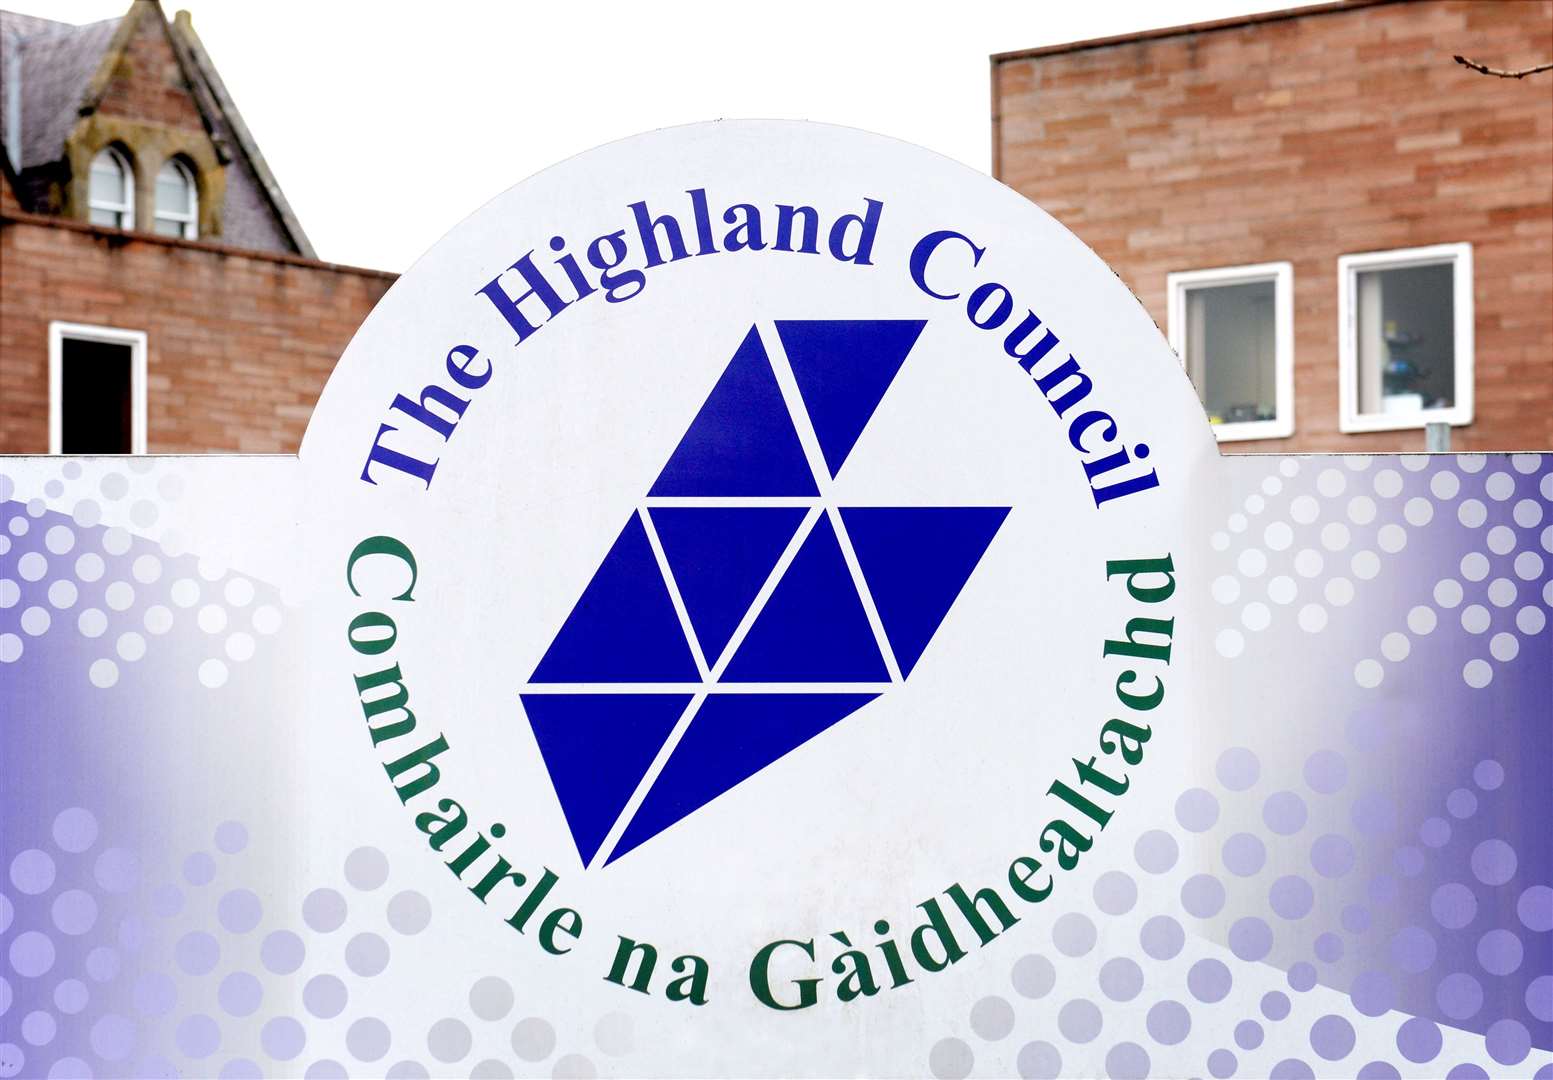 Highland Council staff and others have been thanked for their work in responding to the Covid-19 crisis.